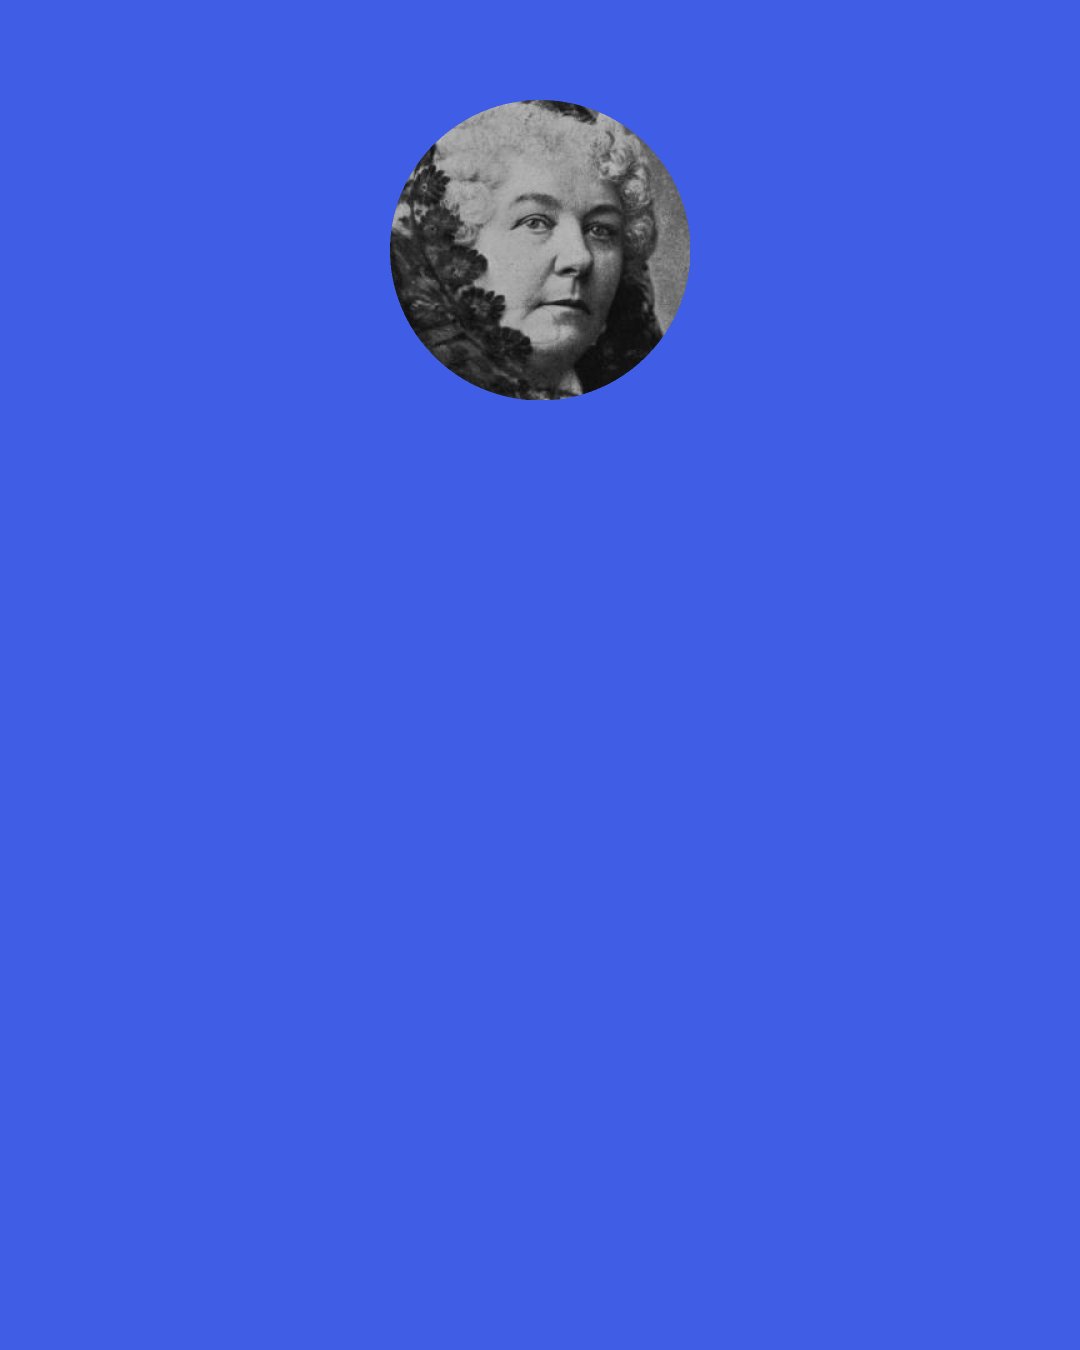 Elizabeth Cady Stanton: Put it down in capital letters: SELF-DEVELOPMENT IS A HIGHER DUTY THAN SELF-SACRIFICE. The thing that most retards and militates against women’s self development is self-sacrifice.